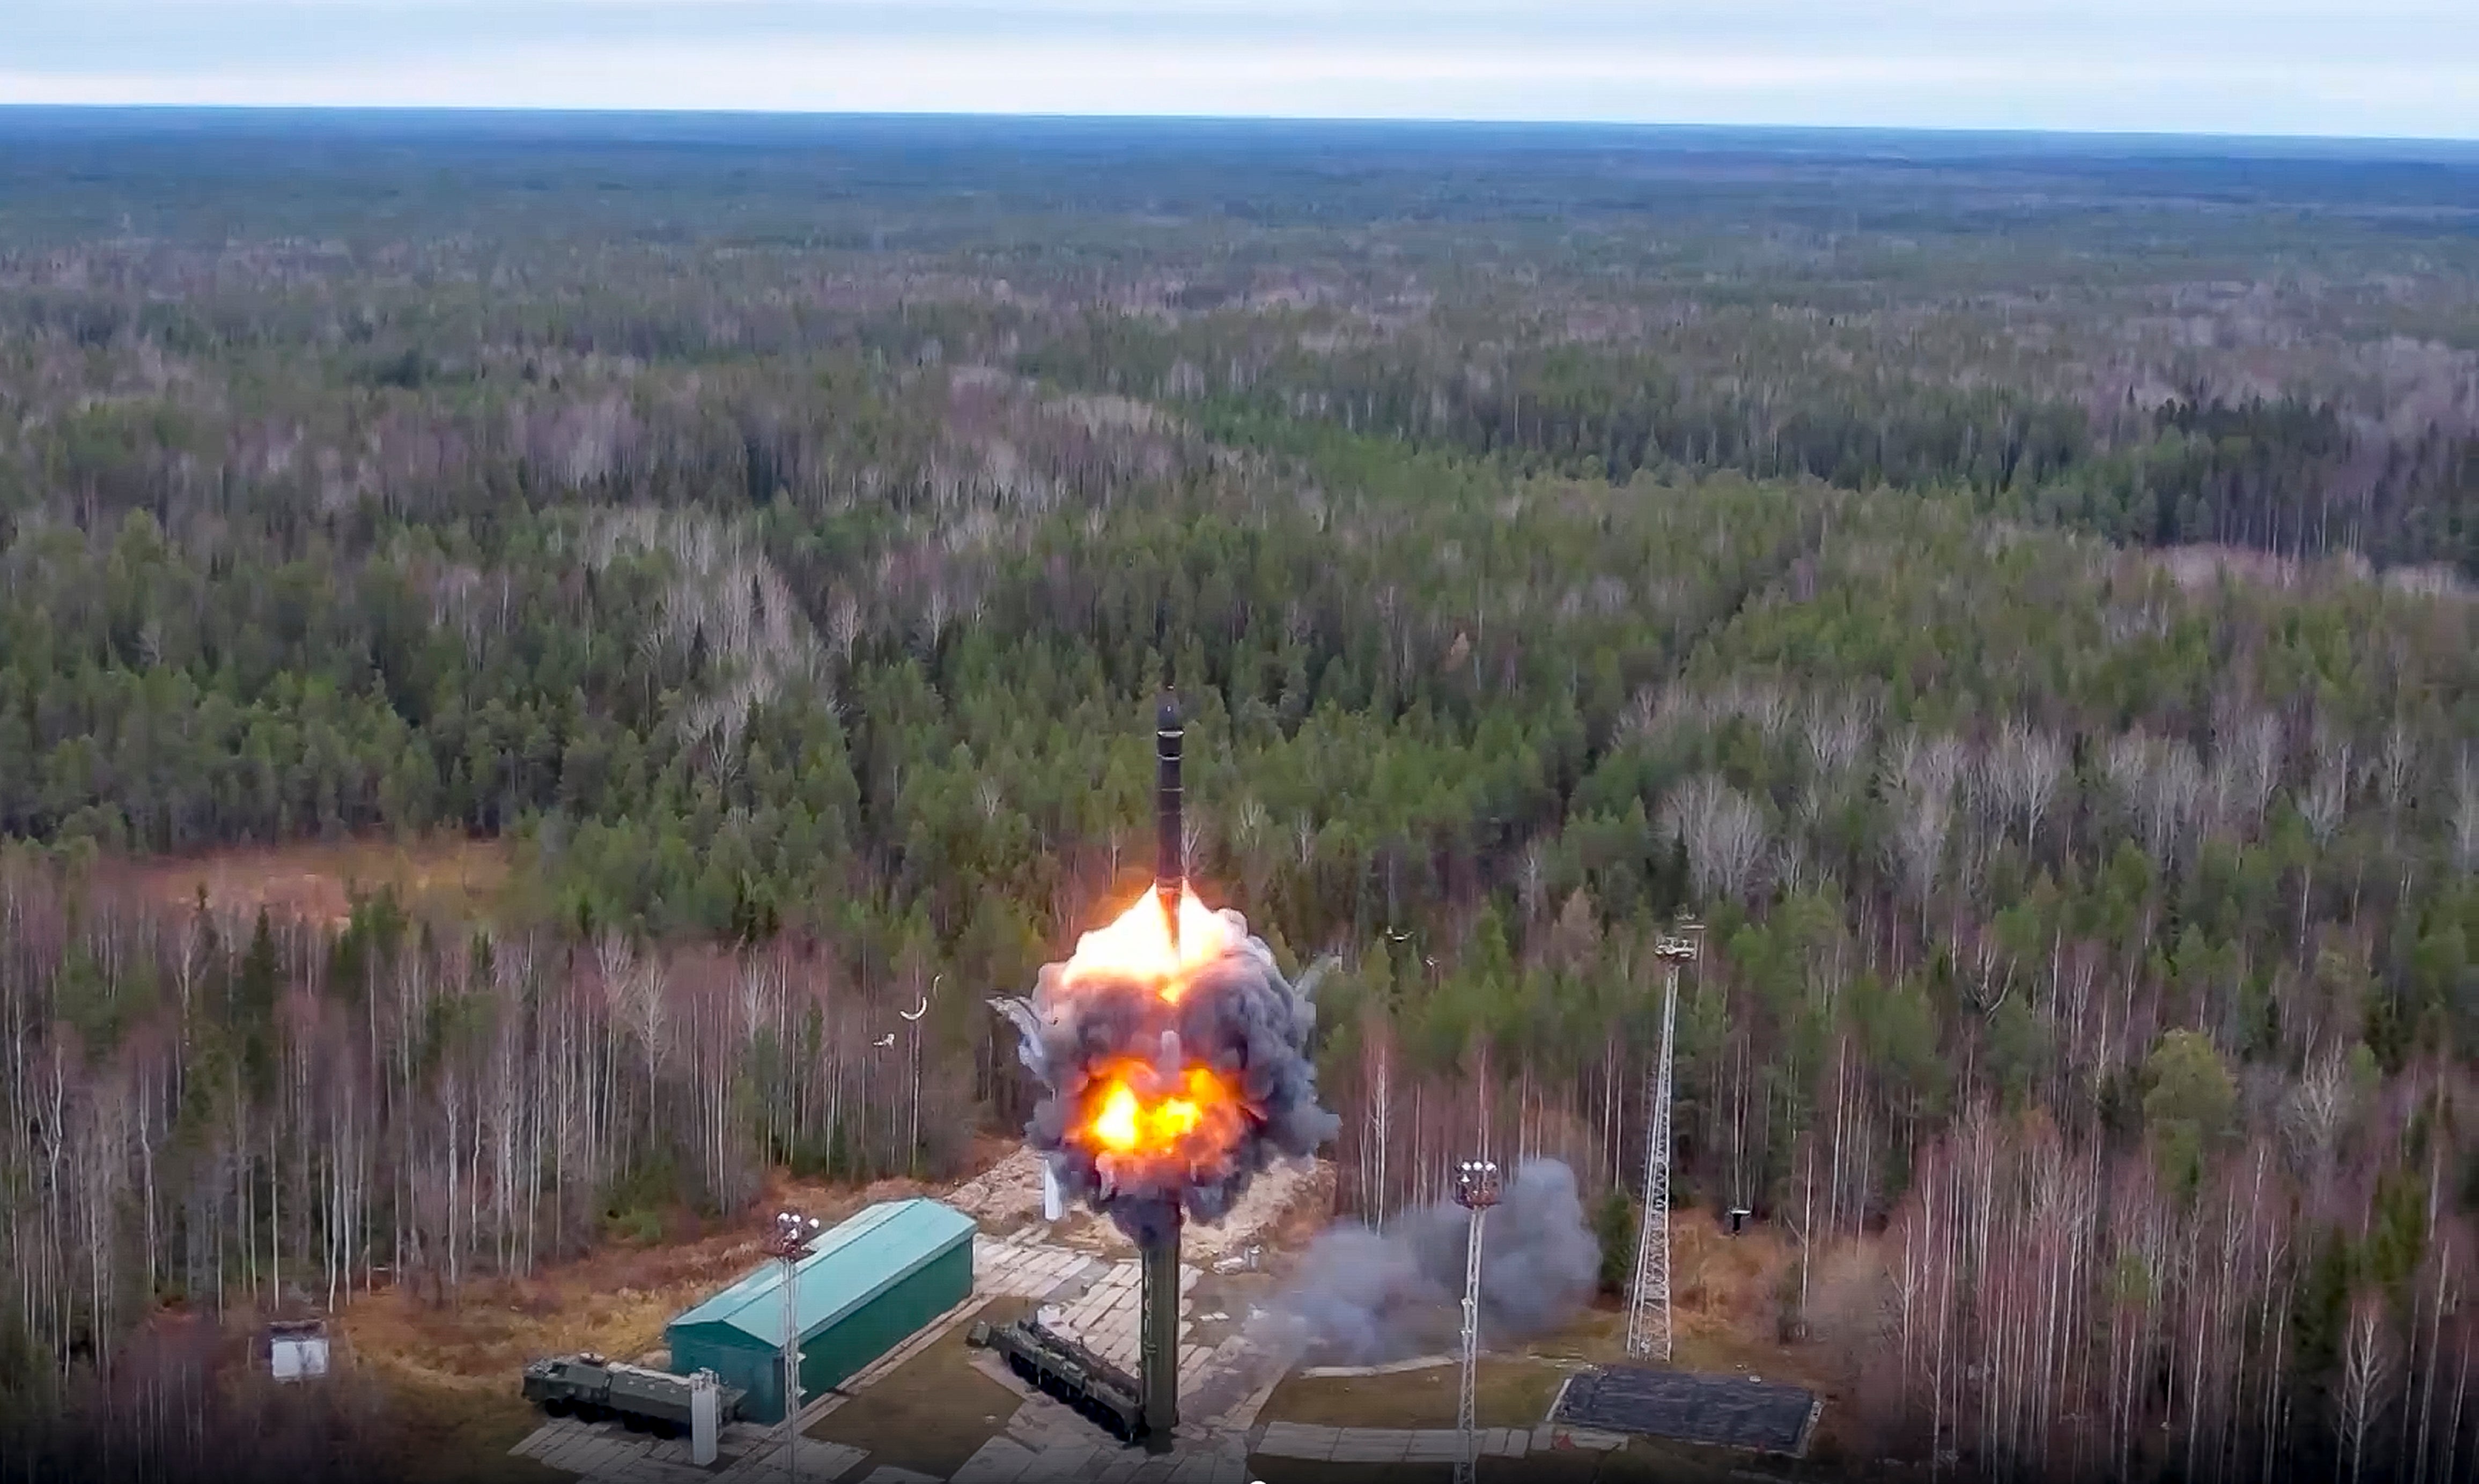 A Yars intercontinental ballistic missile is test-fired as part of Russia's nuclear drills from a launch site in Plesetsk, northwestern Russia